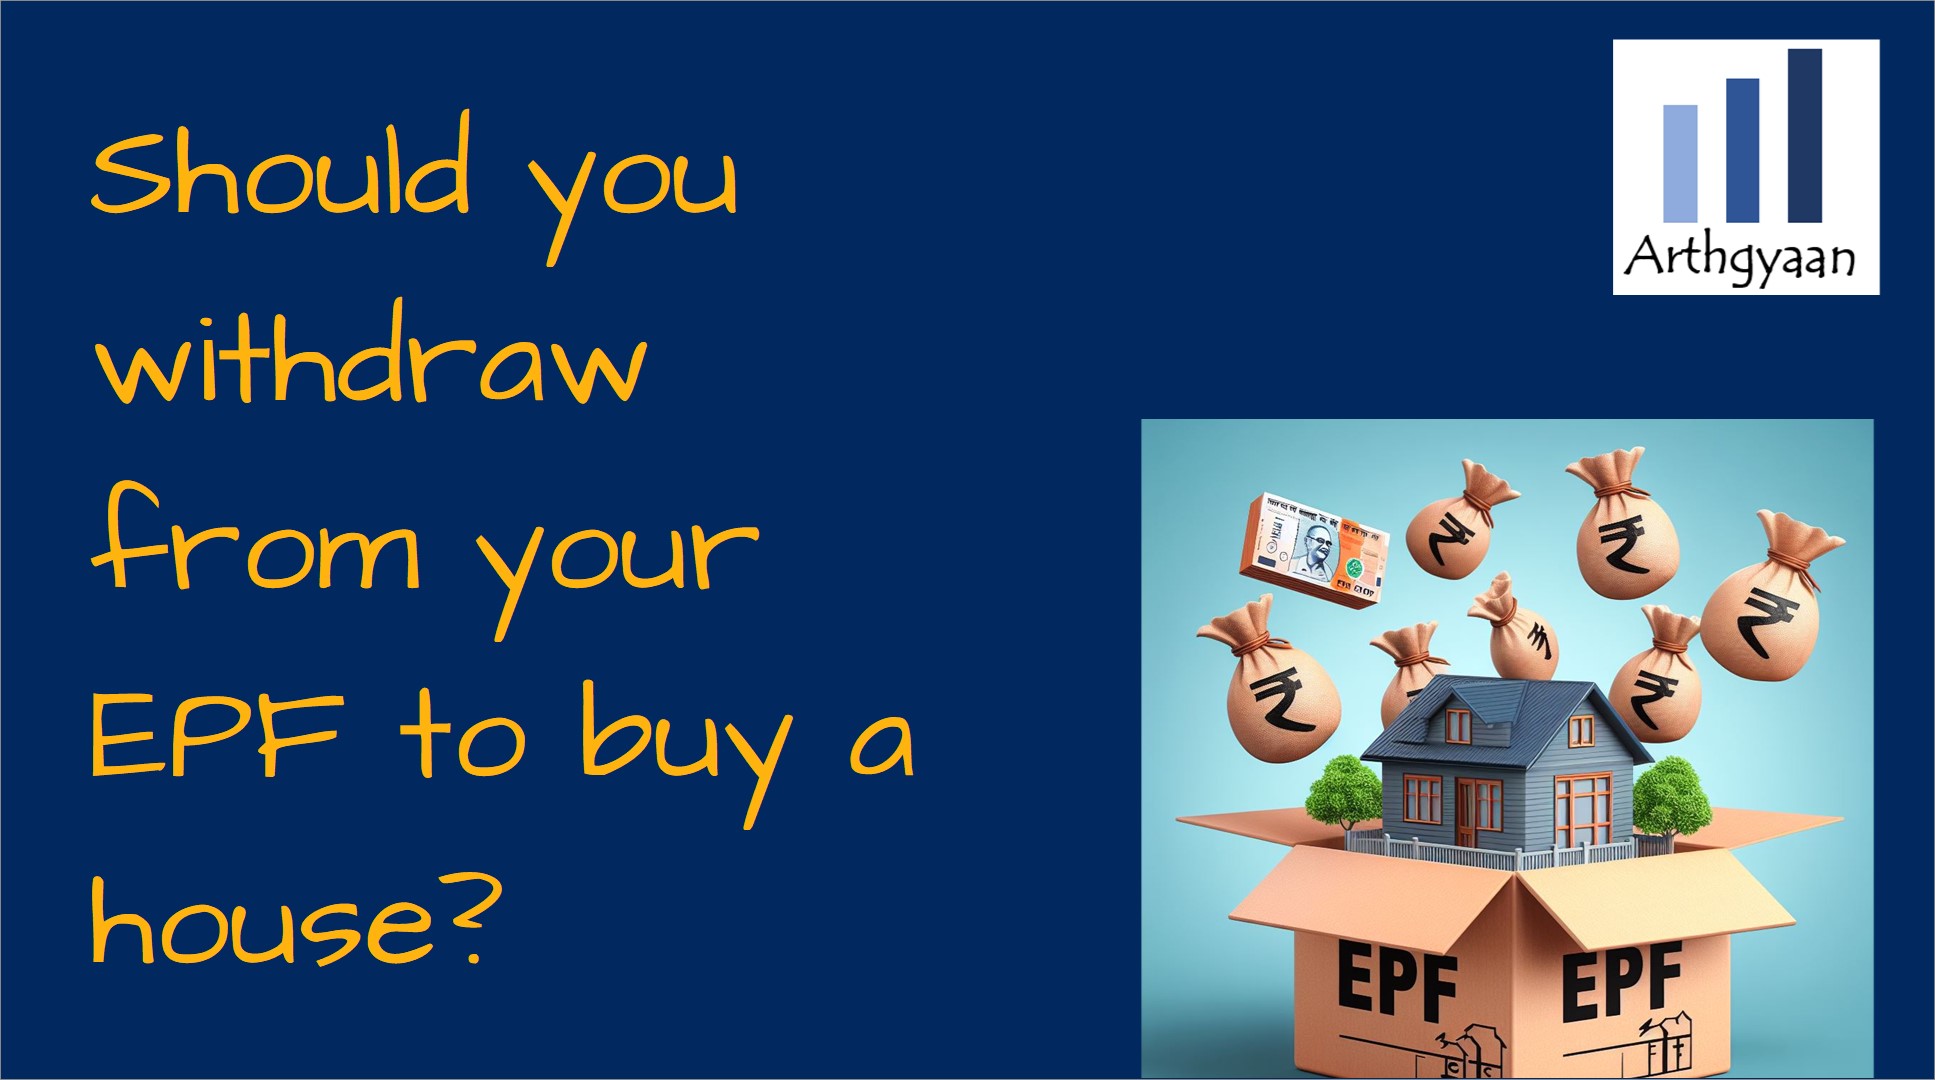 Should you withdraw from your EPF to buy a house?